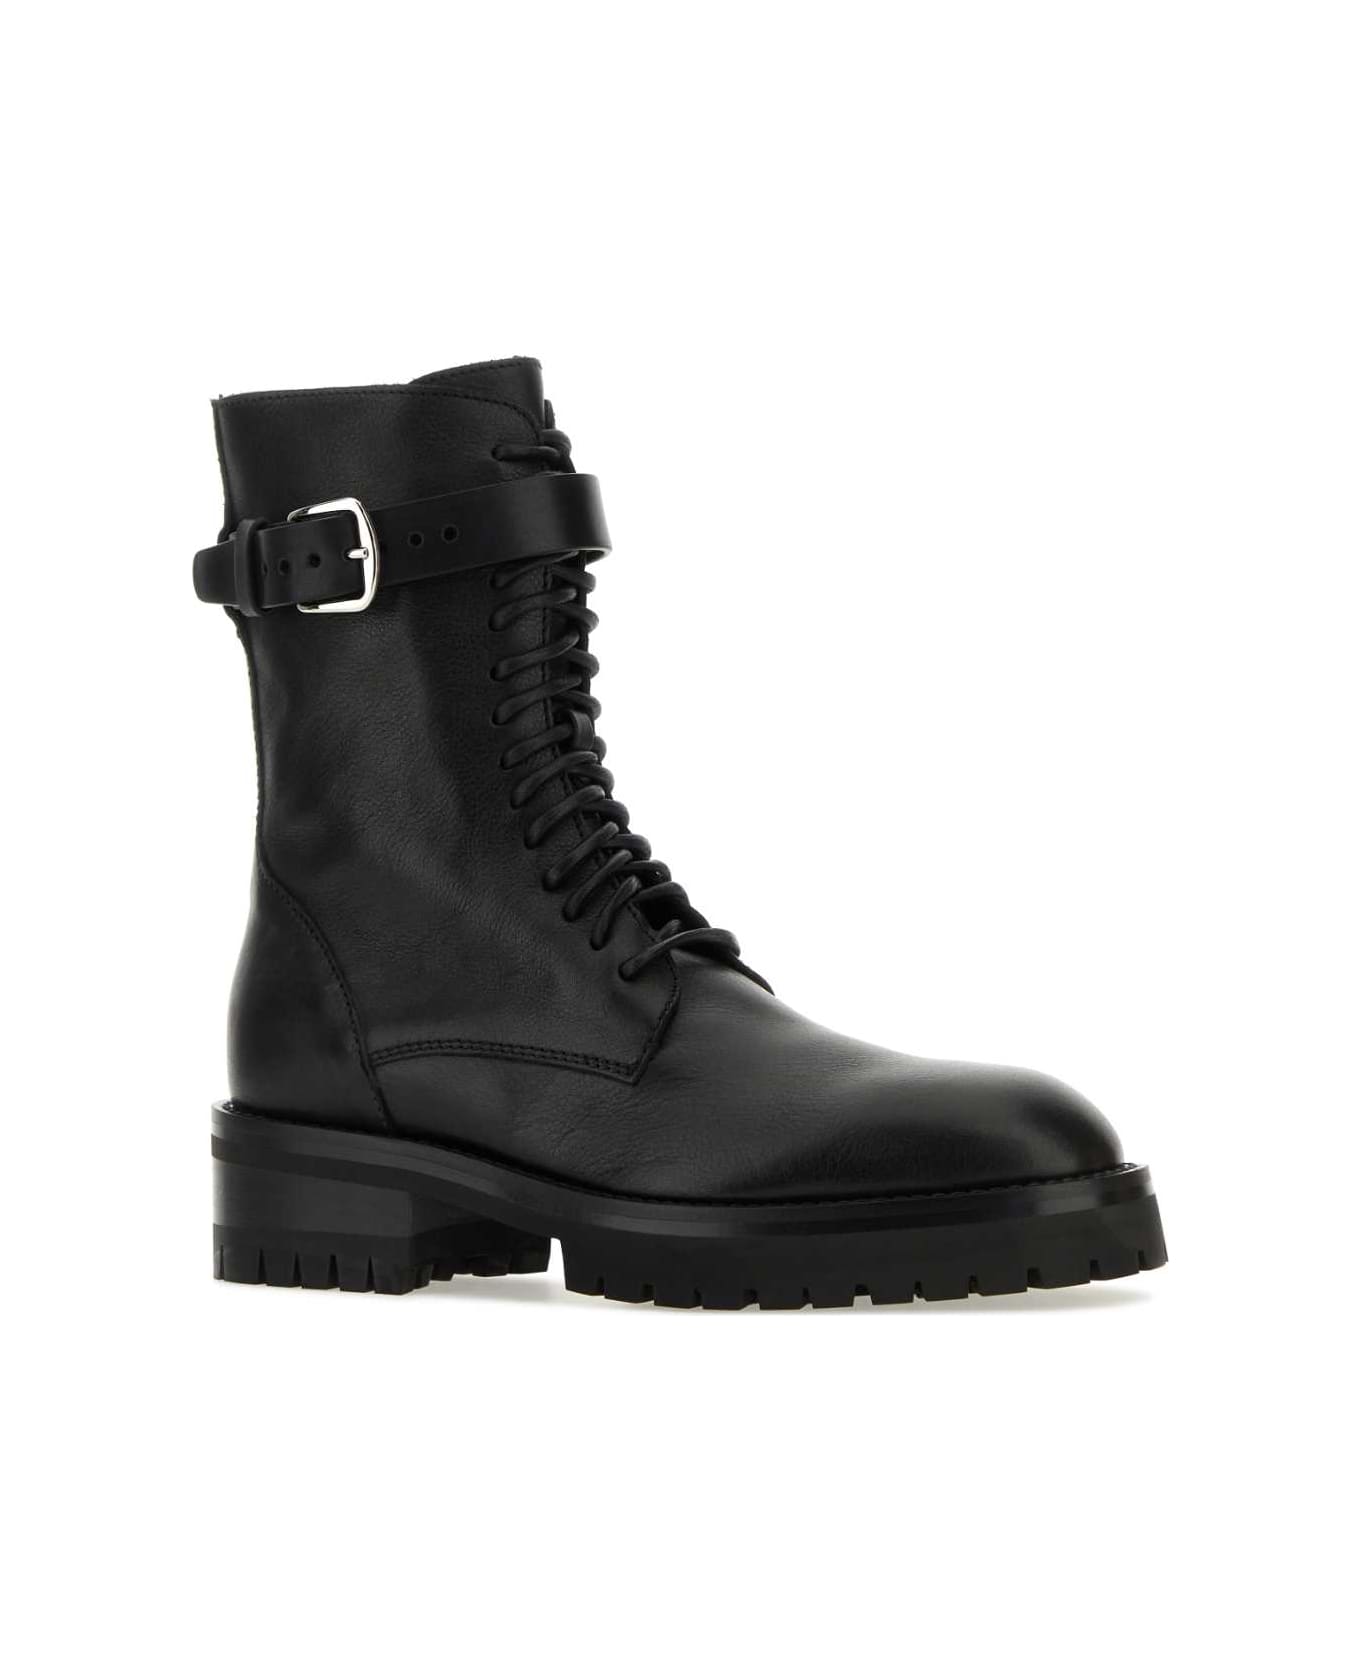 Ann Demeulemeester Black Leather Ankle Boots - BLACK